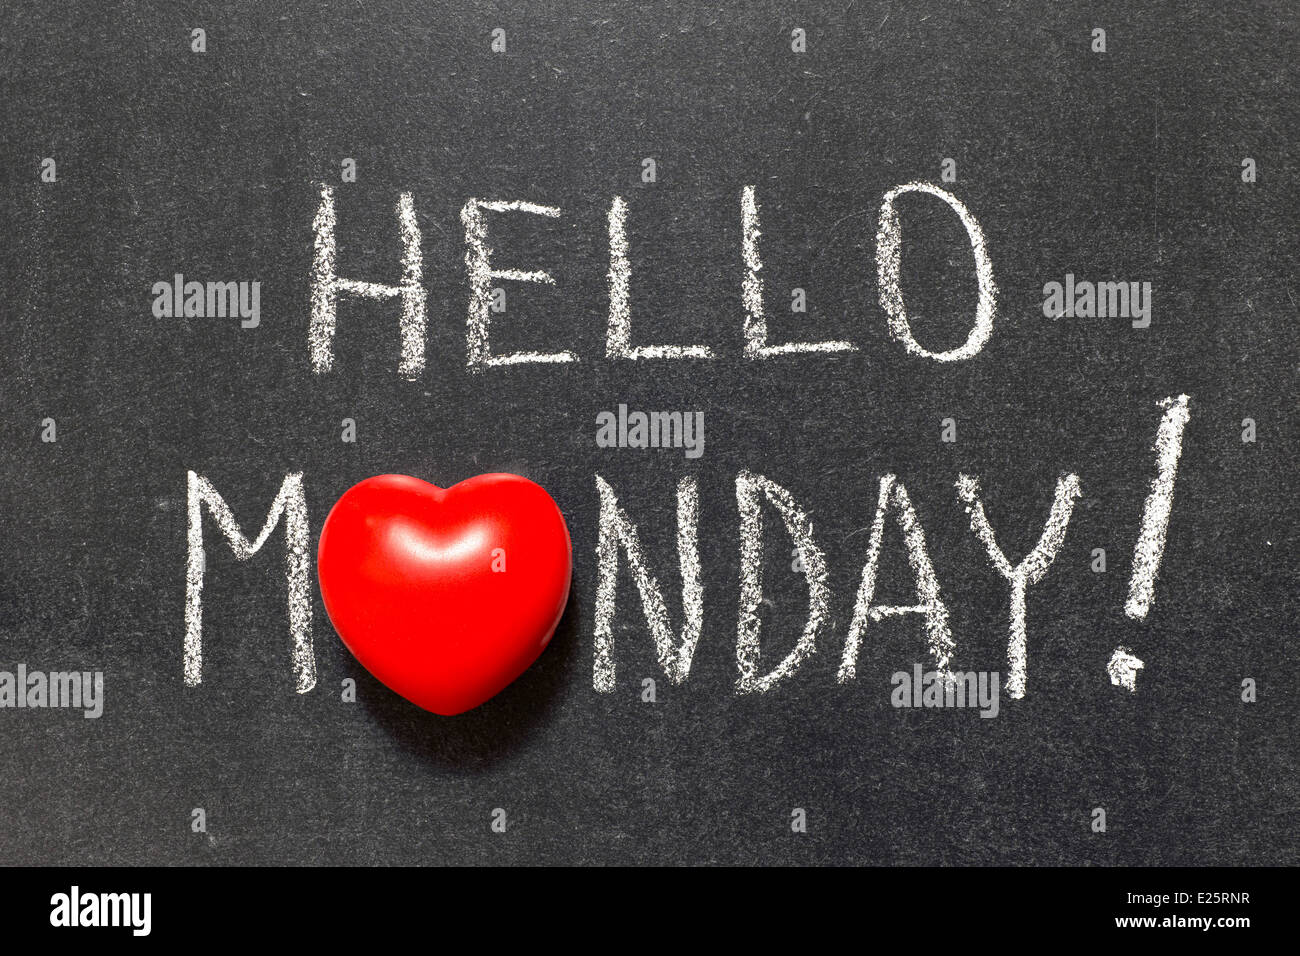 hello Monday exclamation handwritten on chalkboard with heart symbol instead of O Stock Photo